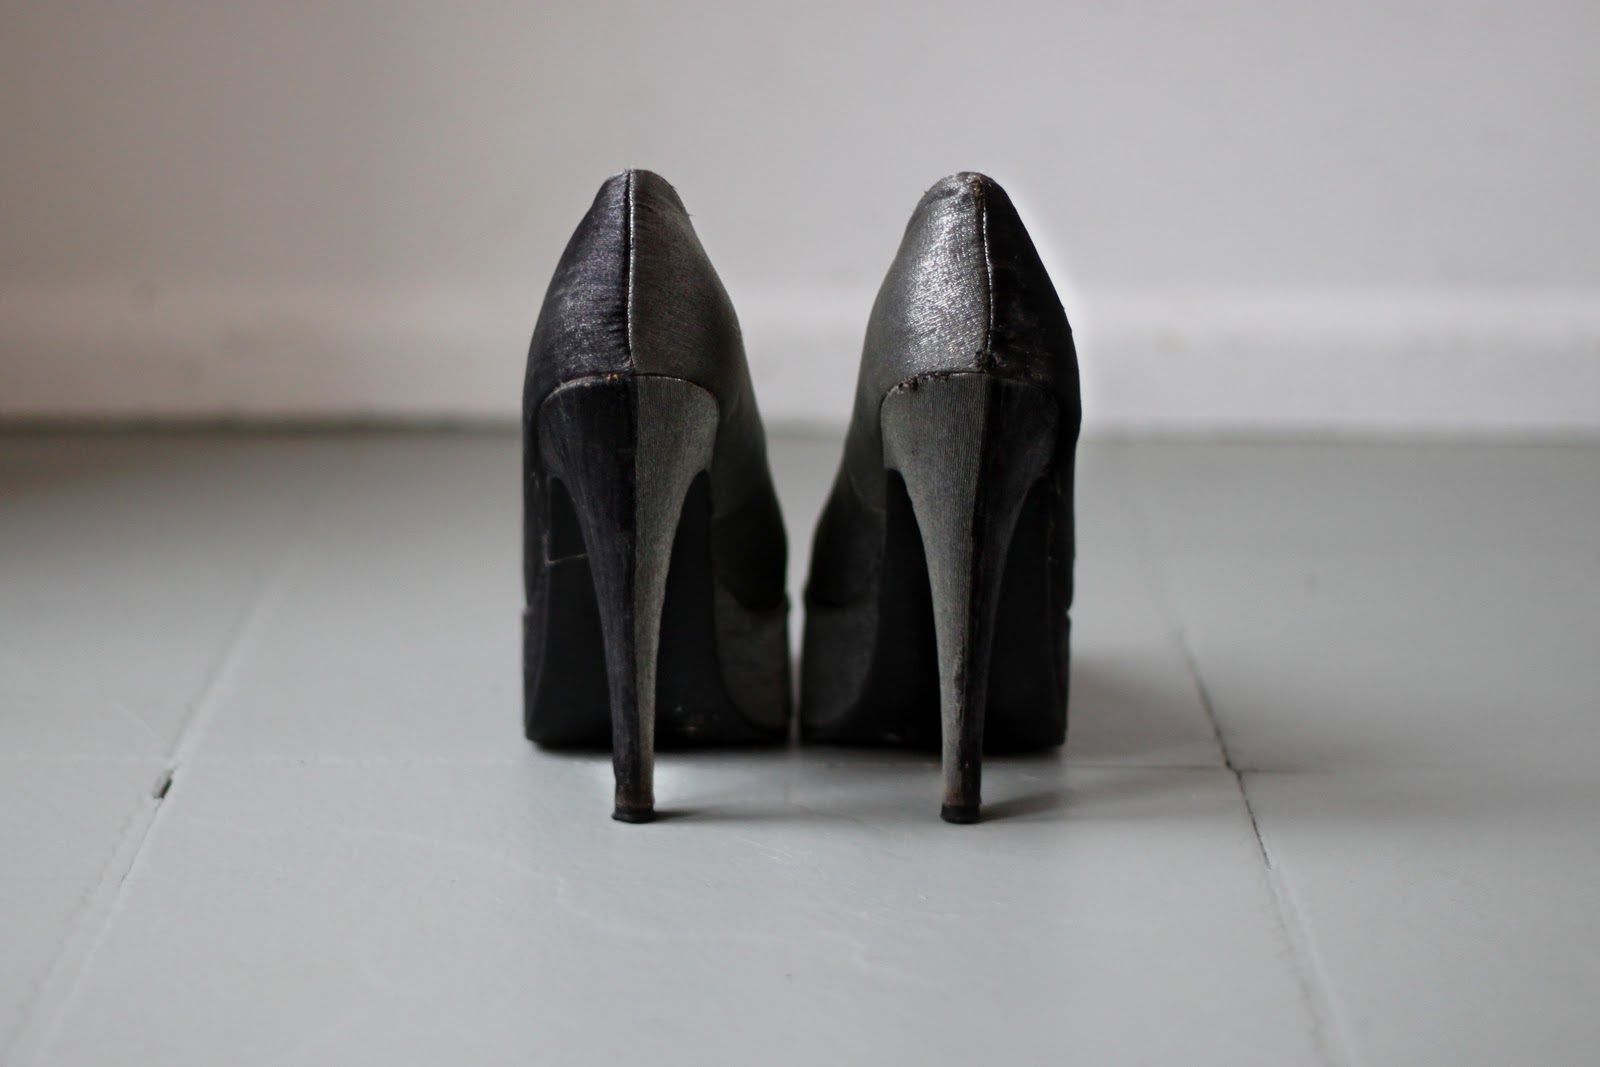 Guest DIY Post: Love Aesthetics two Tone Platform Heels | A Pair & A Spare